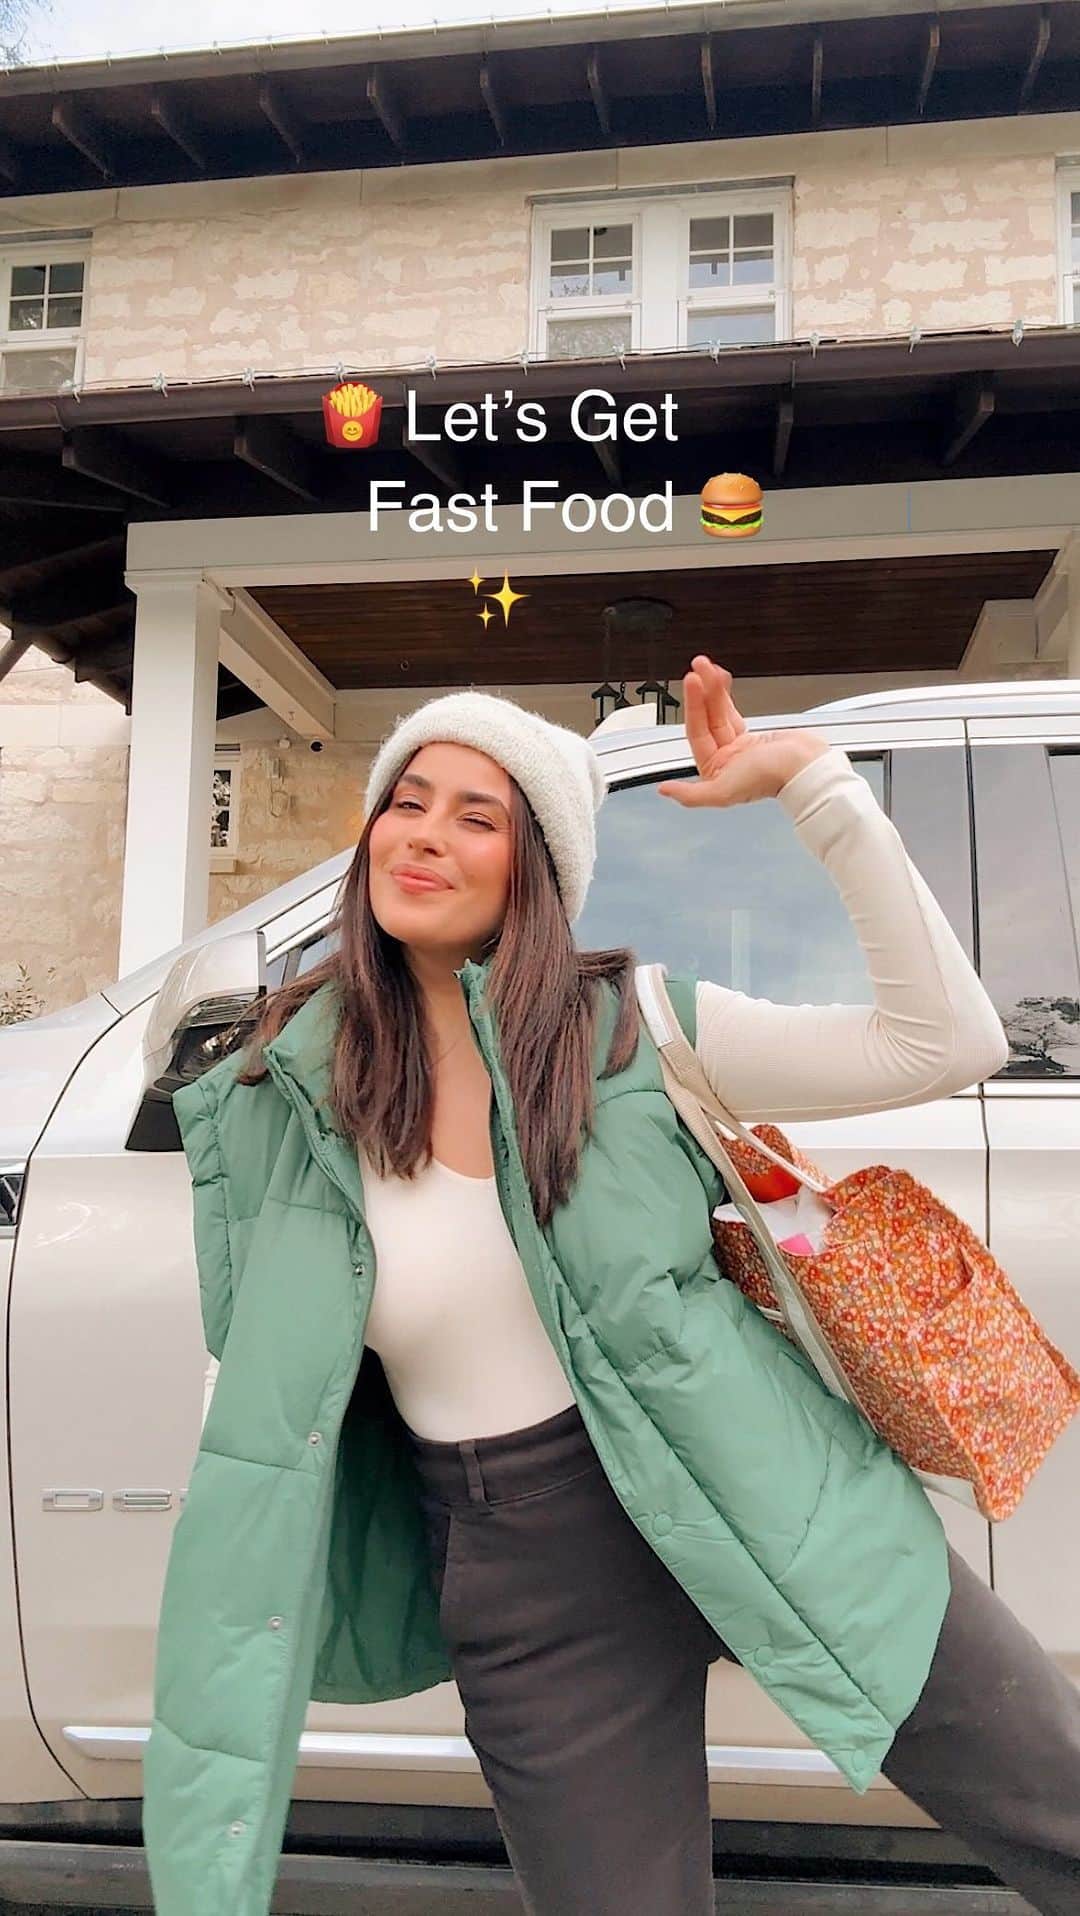 Sazan Hendrixのインスタグラム：「Today’s adventure? Navigating fast-food cravings the WW way. #WWpartner 🚗💨This is how I navigate cravings while staying true to my wellness goals as a busy mom of three. 😅 When I’m on the go I’m using the upgraded @WW app’s ‘What to Order’ feature. I love balancing flavors, tracking on the go, and savoring a moment of ‘me time’ in the car— low key, should we make this a series!?   P.S. If you want to join the WW club click the link in my bio for an exclusive discount offer to try it out! 🫶🏽 #WWFastFoodDiary #MomLife #SmartChoices #AD」